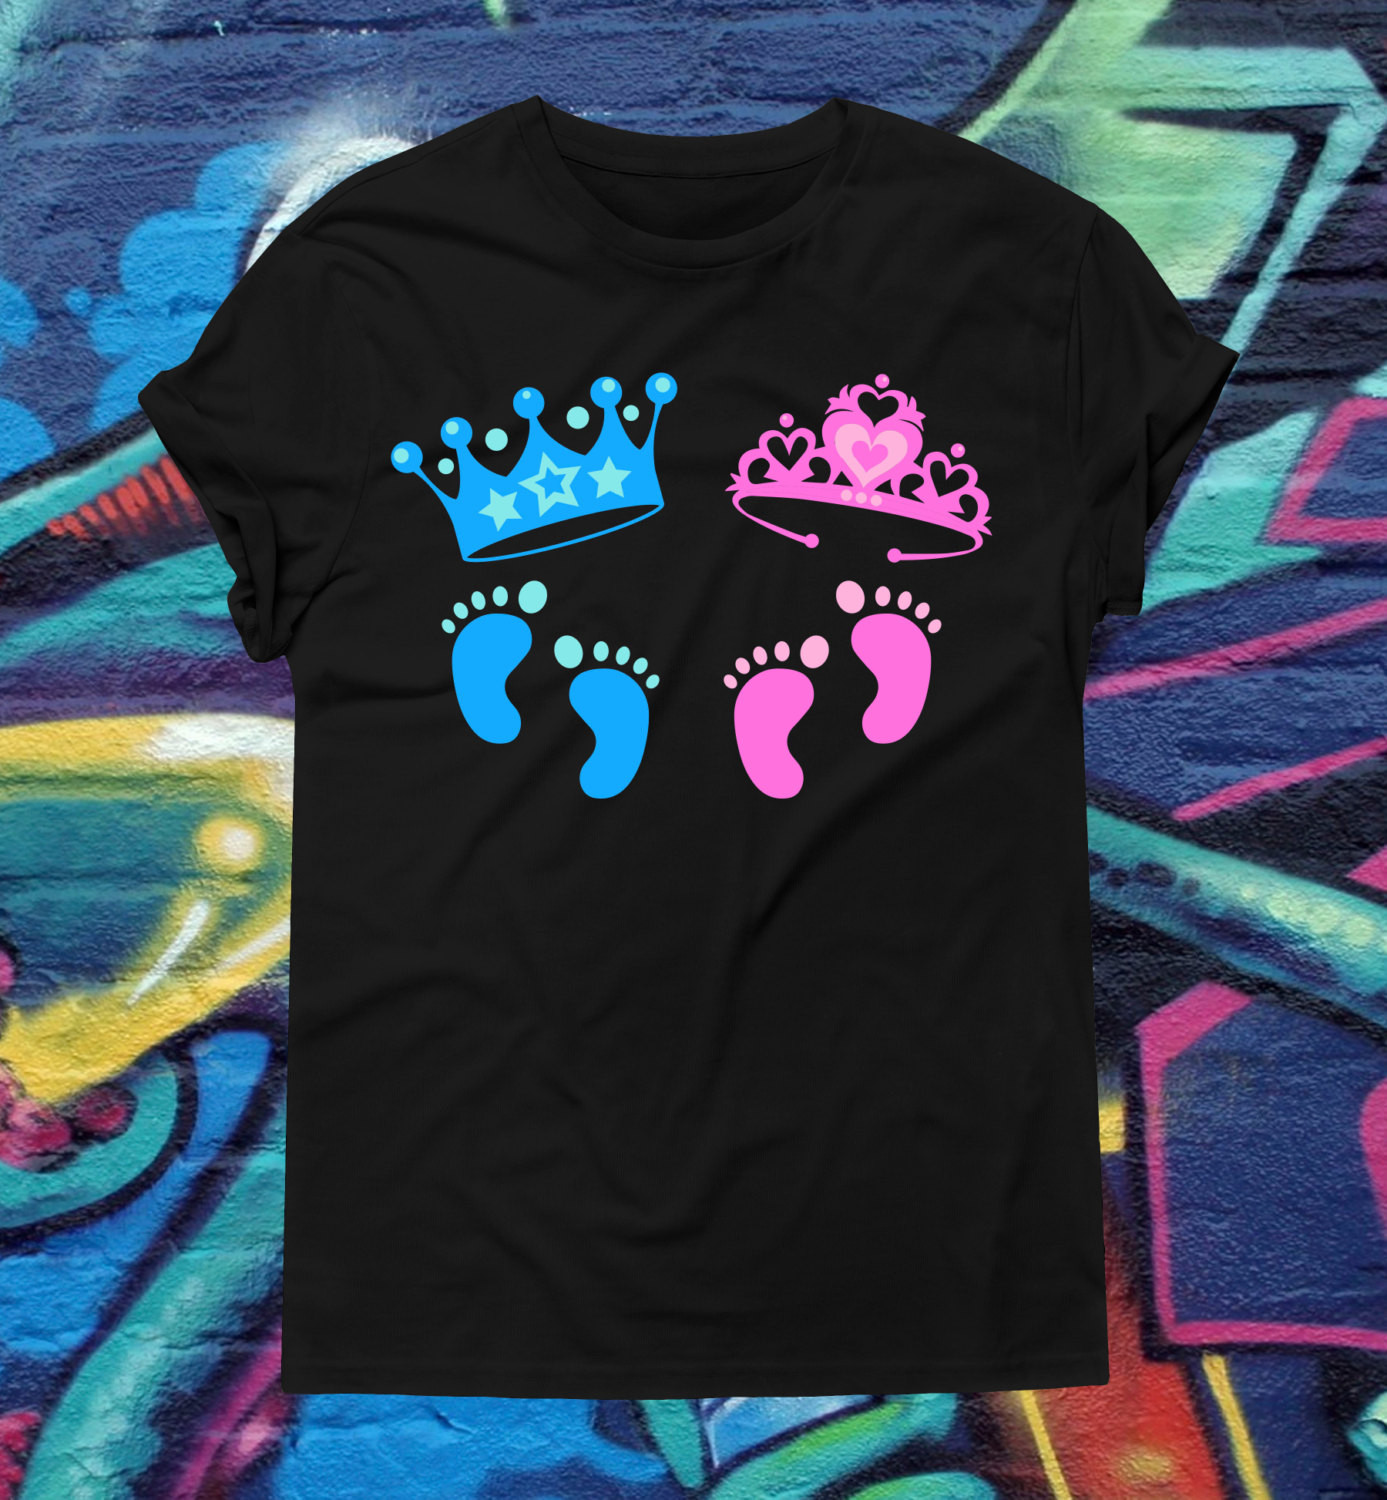 Gender Reveal Party Shirt Ideas
 Twins Gender Reveal Game T shirt Baby Girl Baby Boy Pregnancy